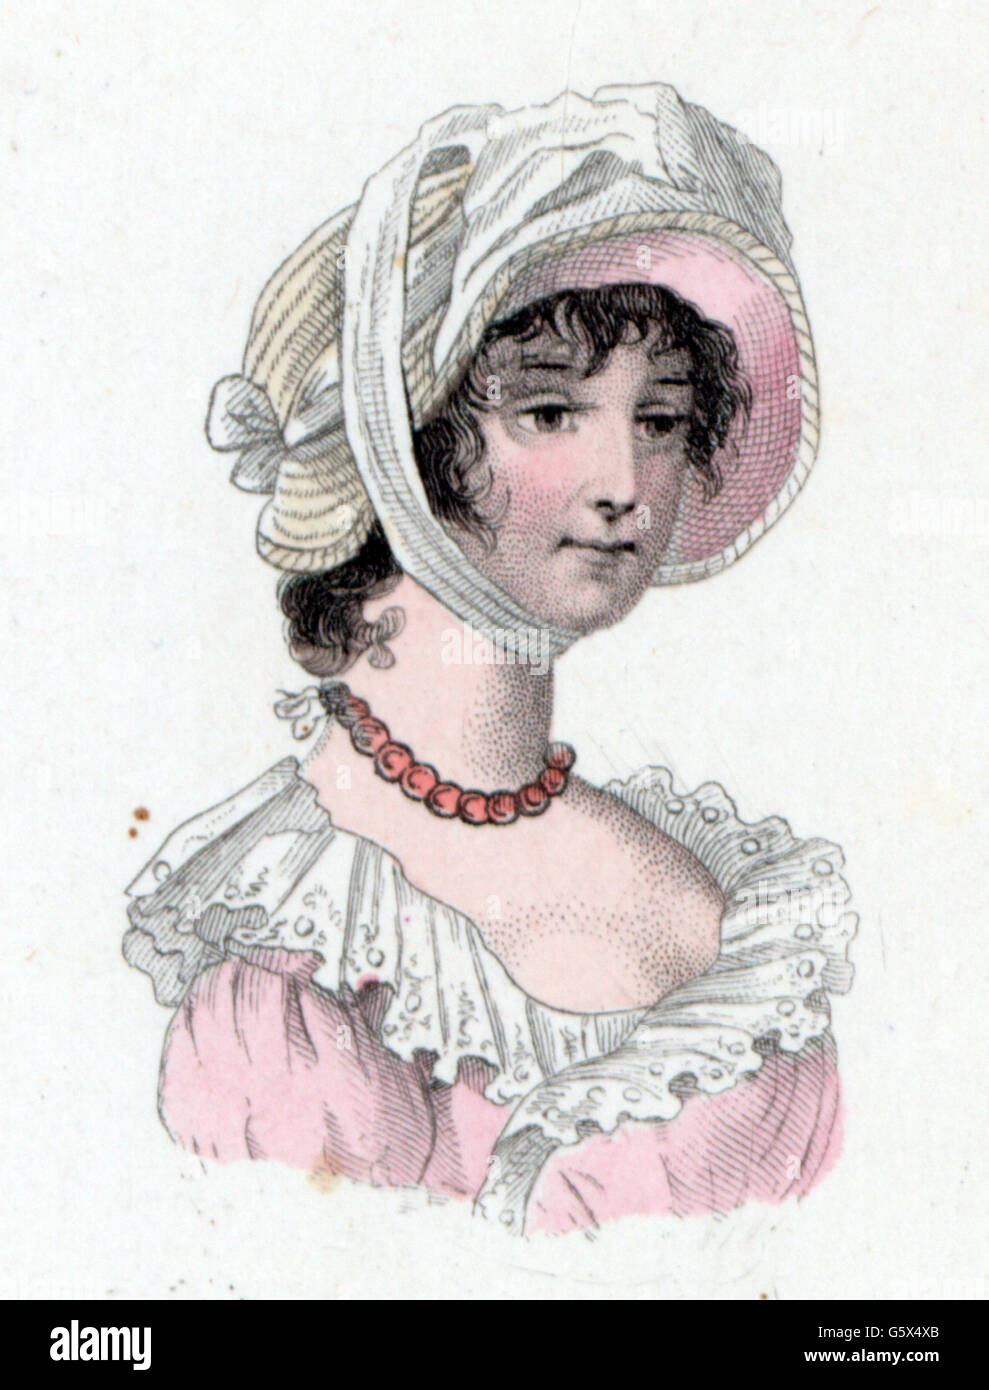 fashion, 19th century, woman with summer hat, 1804, Additional-Rights-Clearences-Not Available Stock Photo